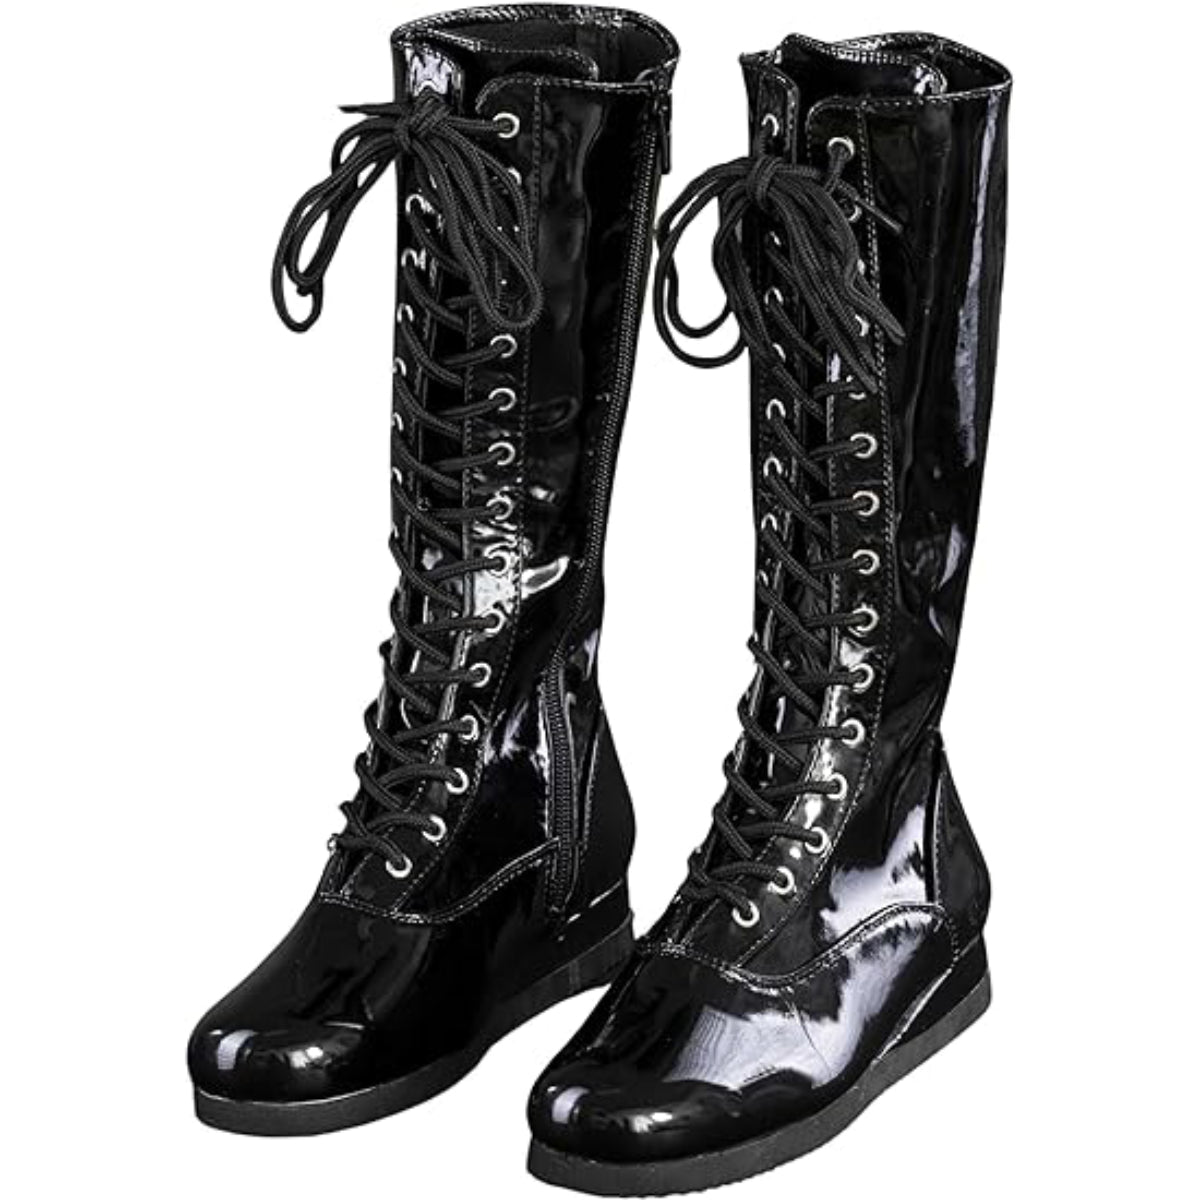 Kid-Friendly Pro Wrestling Boots Perfect for Halloween Costume Cosplay Black